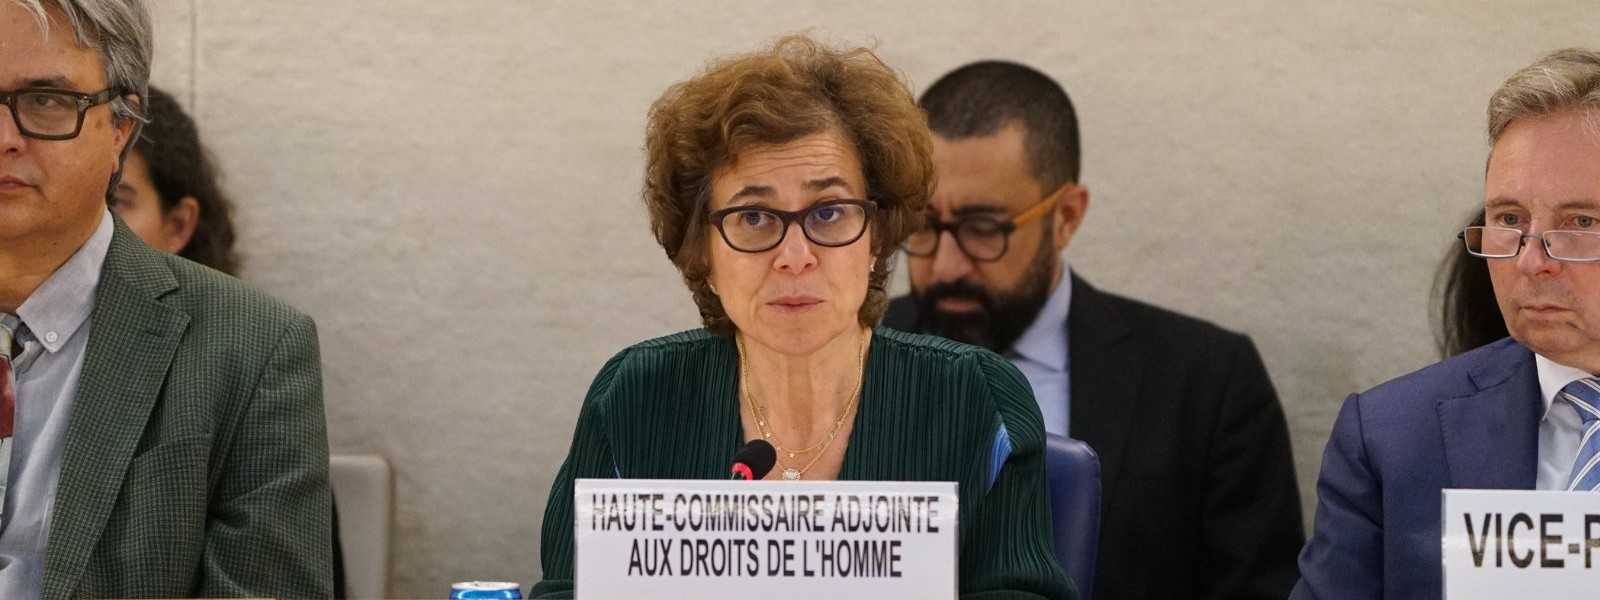 UNHRC alarmed over the use of draconian laws